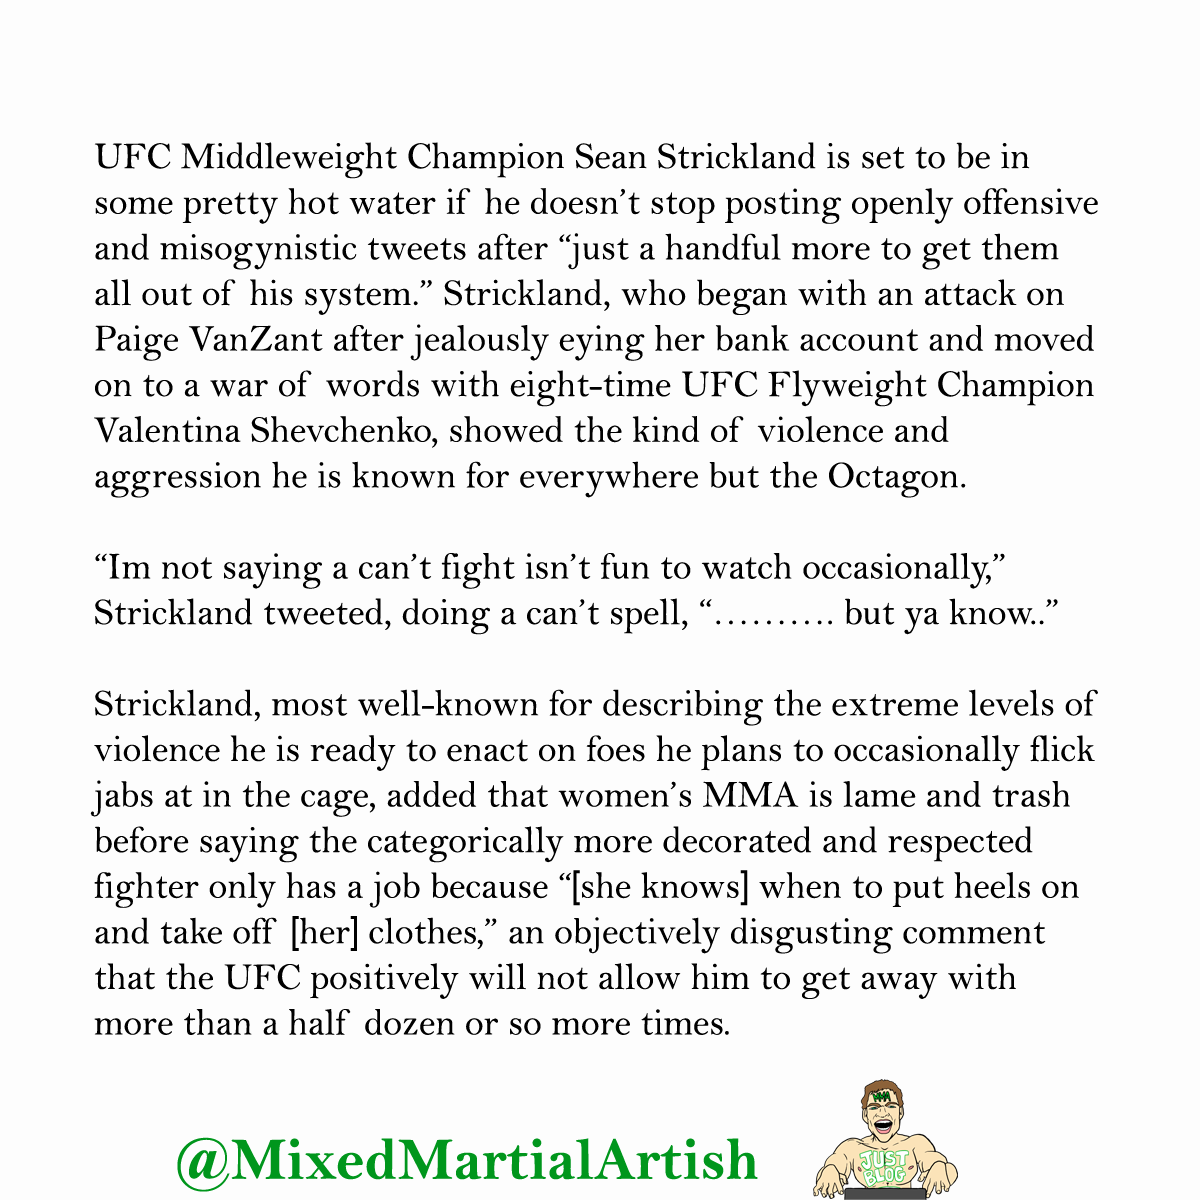 Ten more times TOPS, and then they’re drawing a hard line of just a few more. #ufc #mma #seanstrickland #valentinashevchenko #mixedmartialartish mixedmartialartish.com/2023/11/11/ufc…